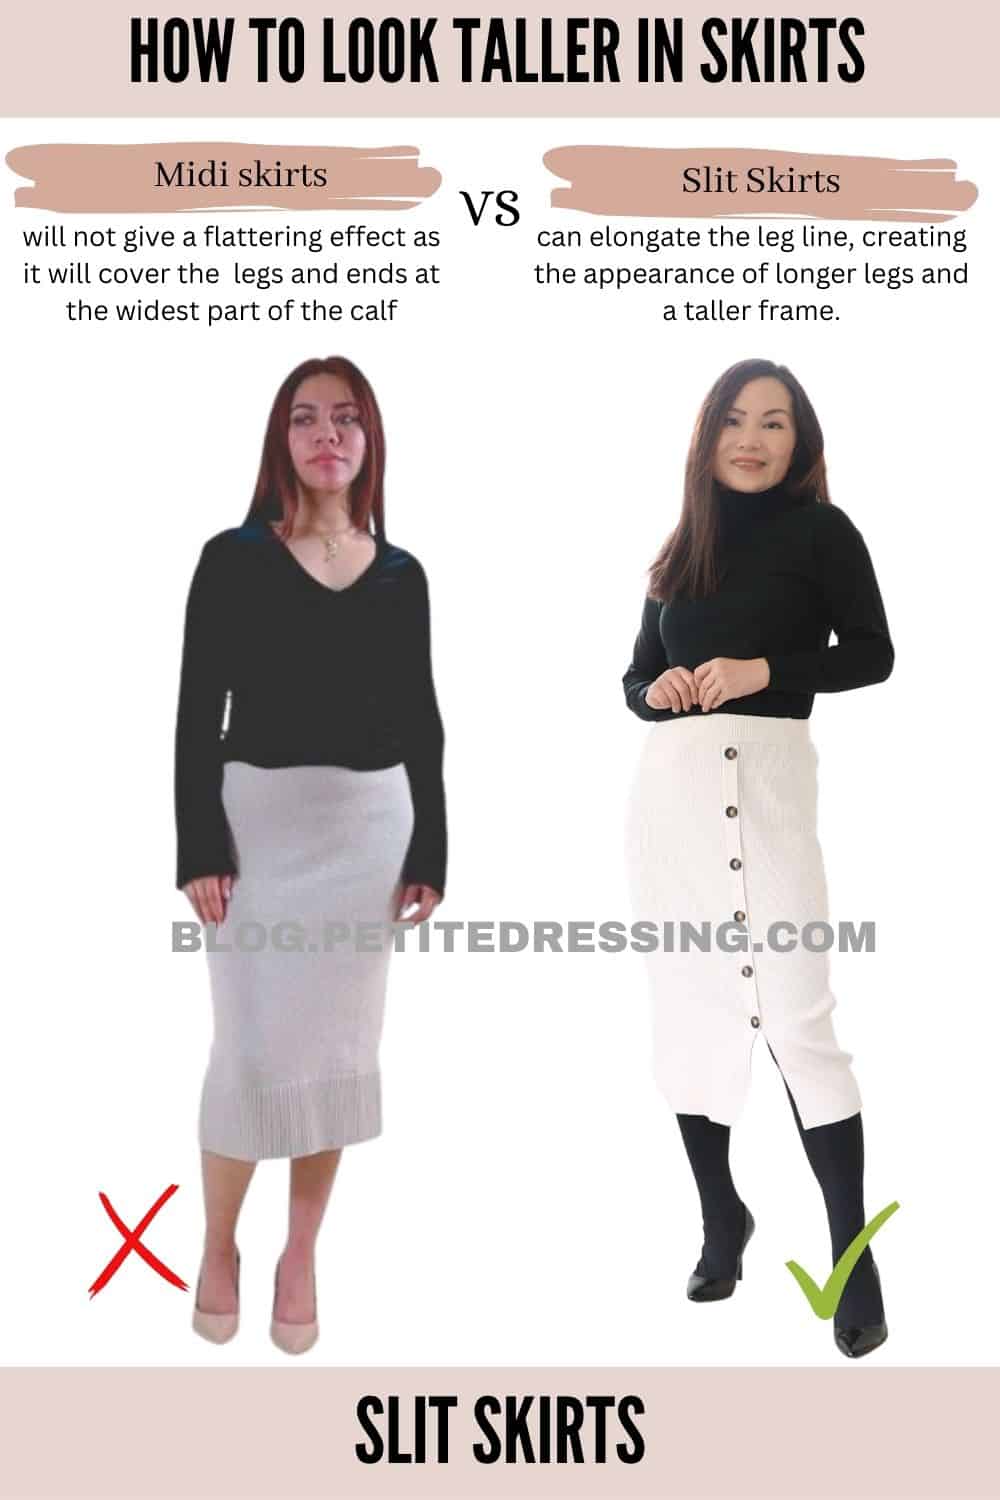 How to look taller in skirts